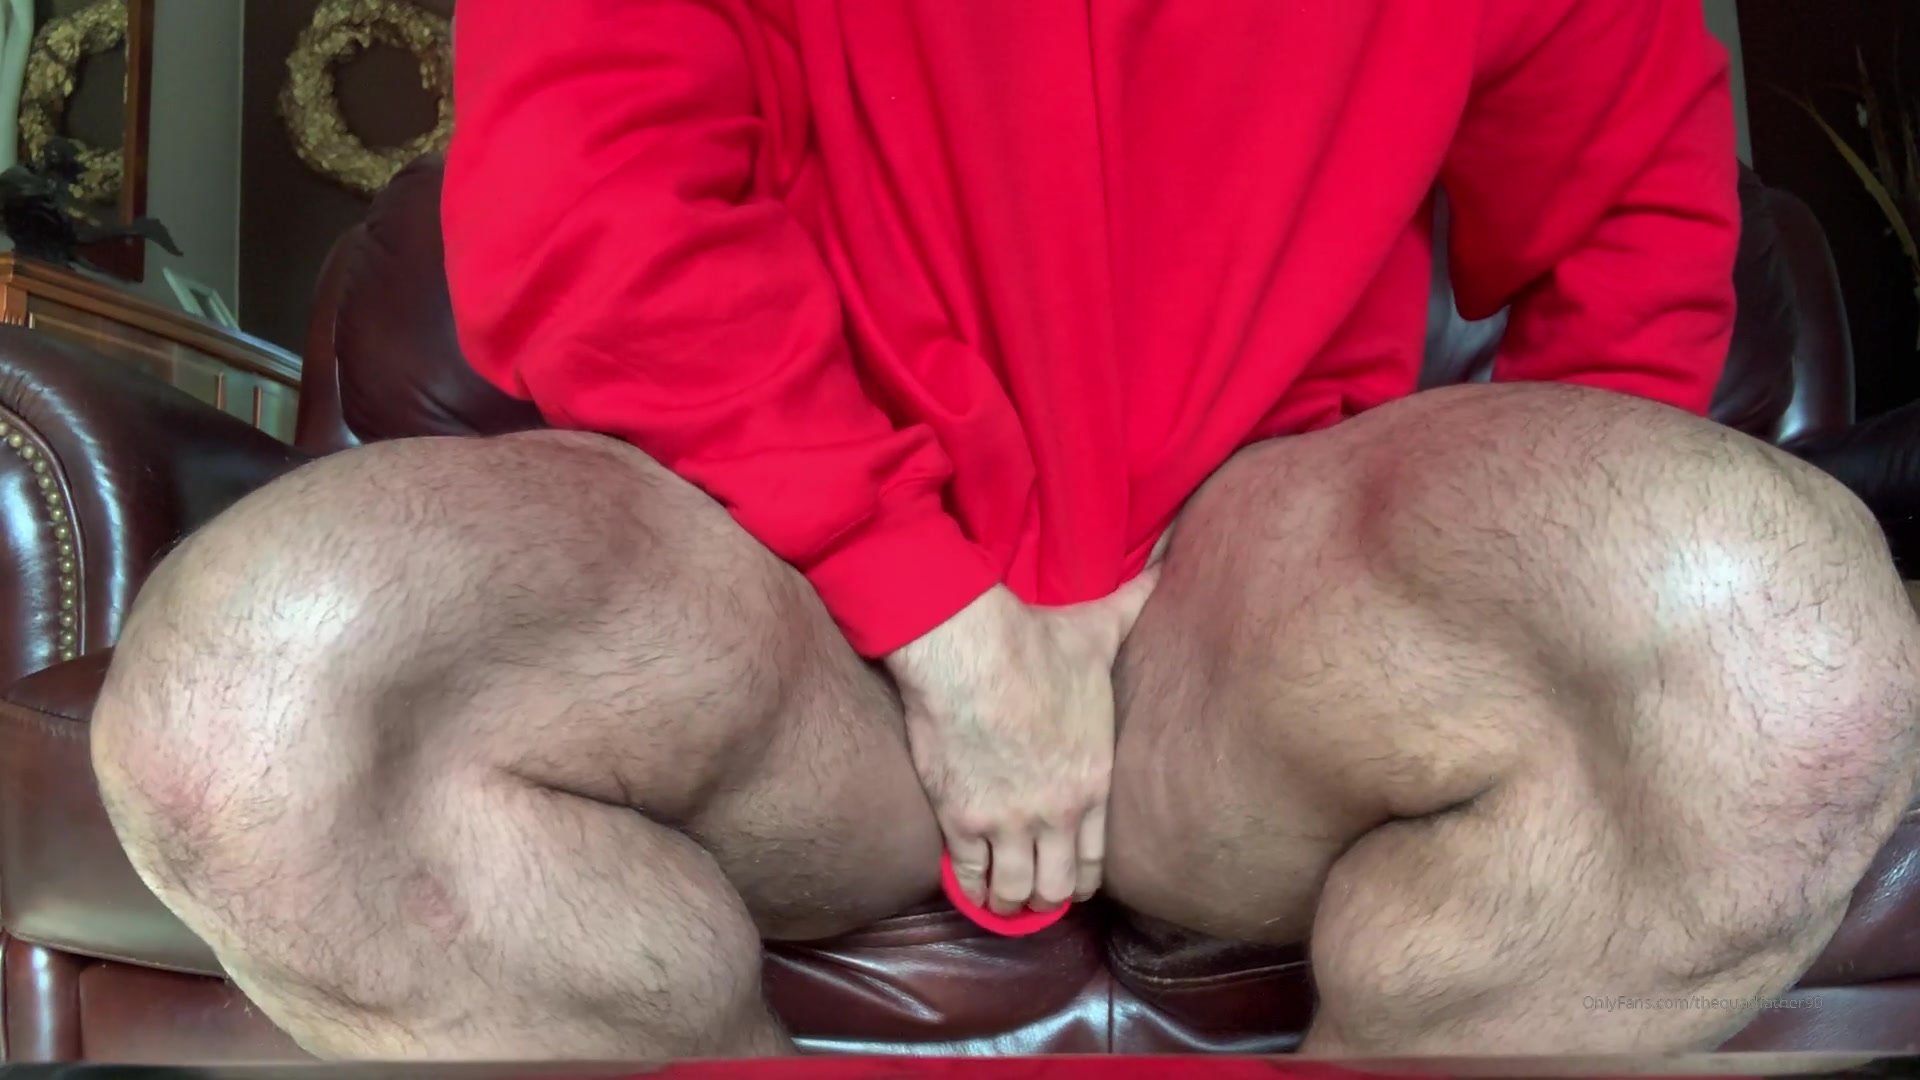 Thick Hairy Thighs - ThisVid.com